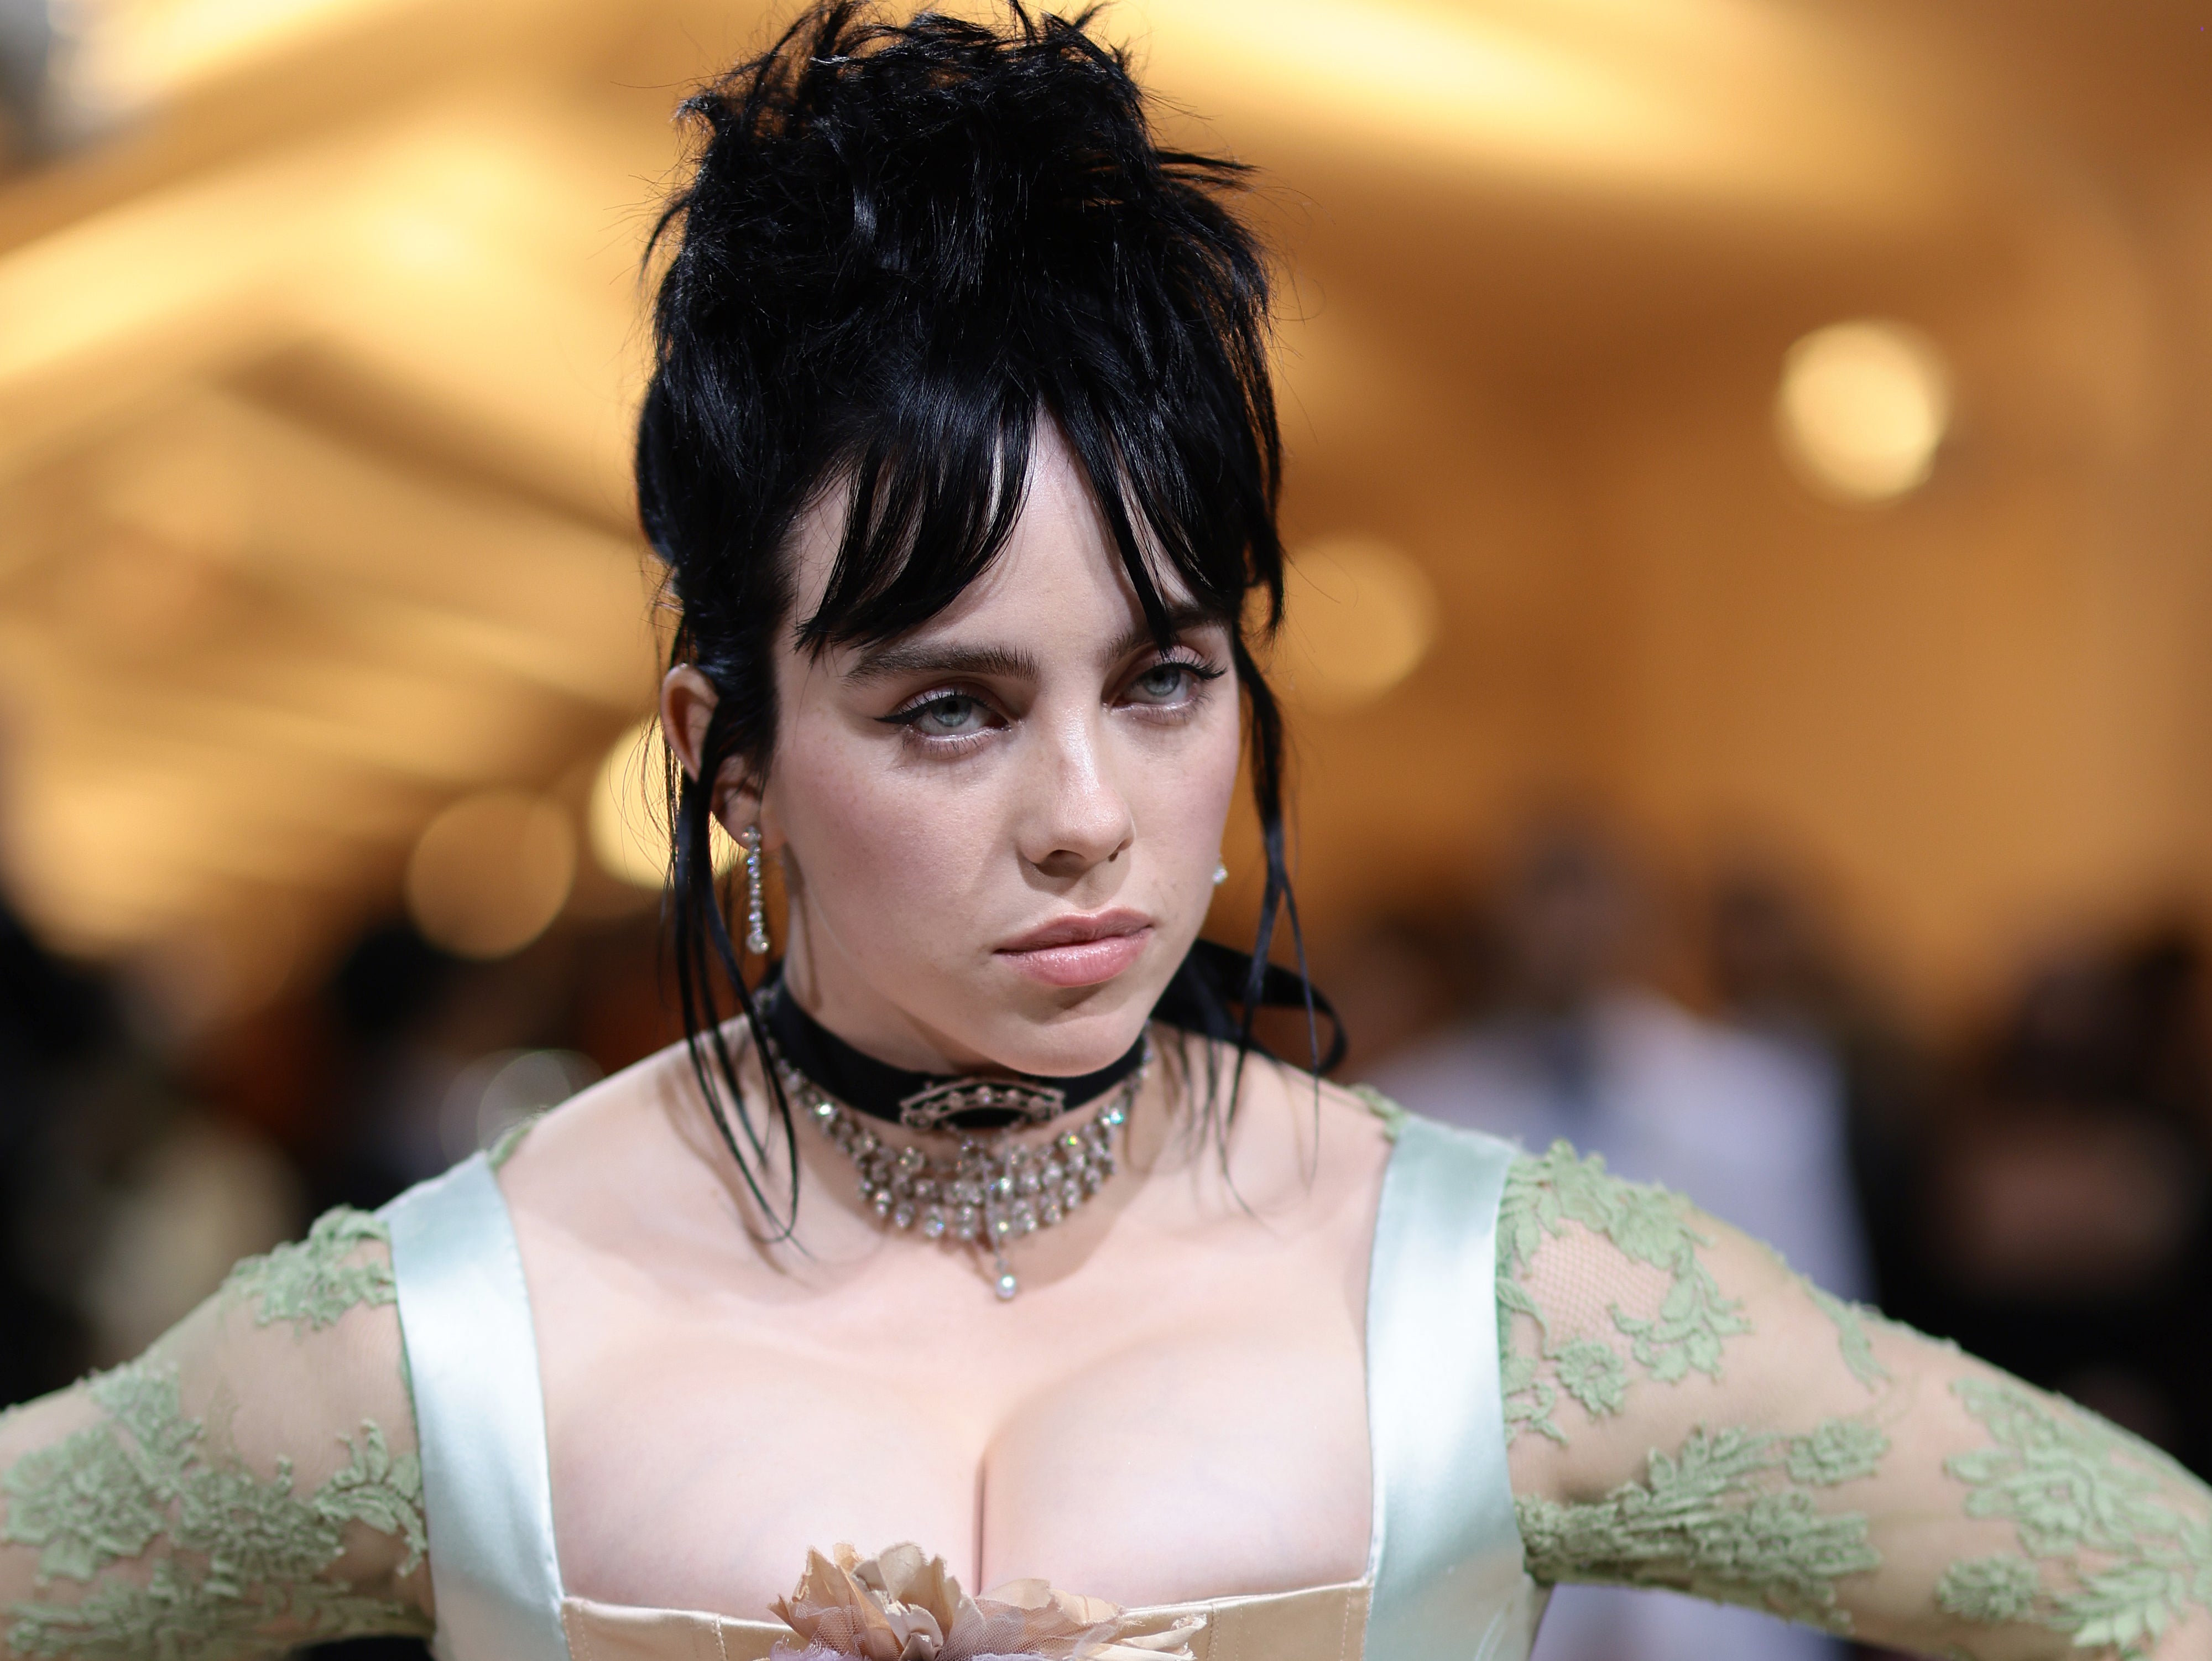 Billie Eilish attends The 2022 Met Gala Celebrating "In America: An Anthology of Fashion" at The Metropolitan Museum of Art